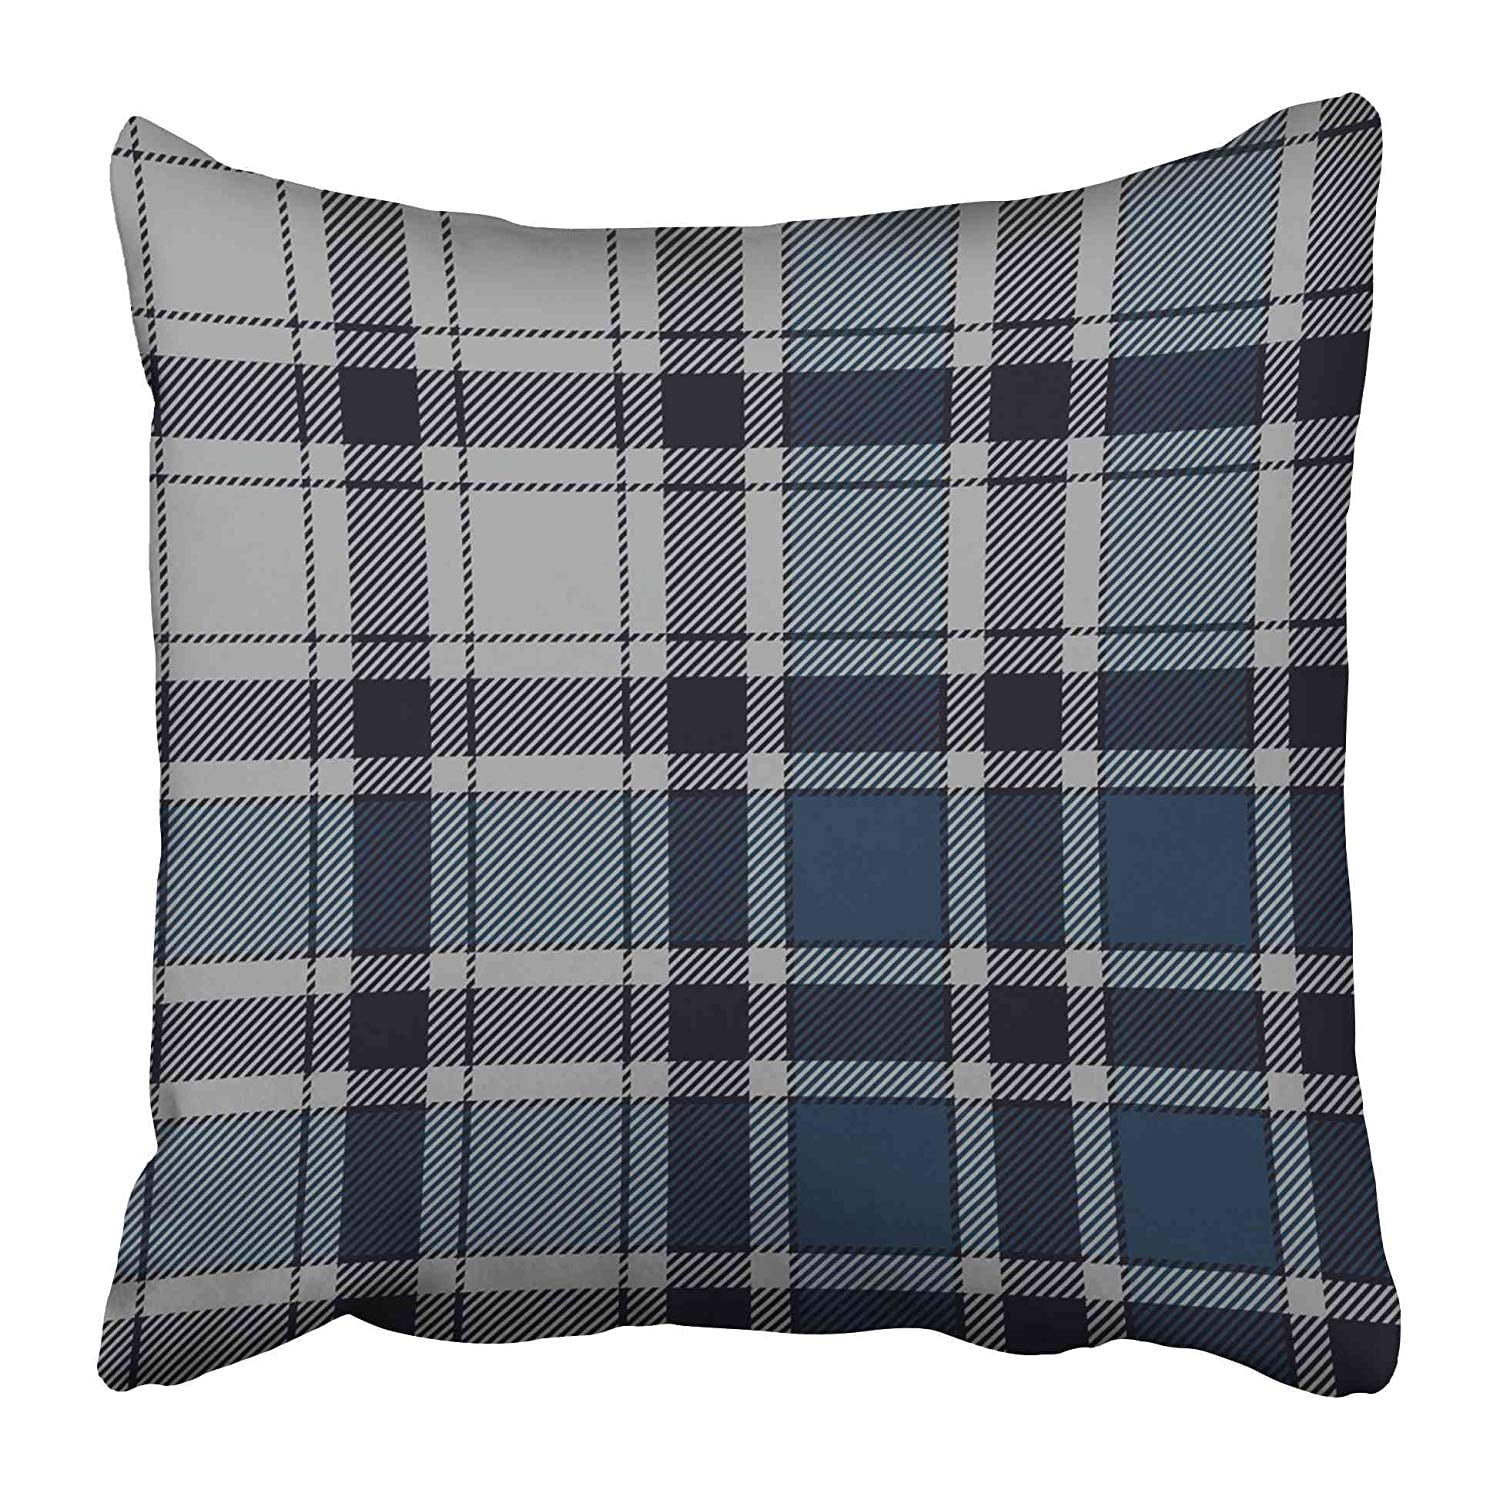 with Tassels for Couch Sofa Living Room Bed Buffalo Check Plaid Rectangle Throw Pillow Cases Cushion Cover HWY 50 Farmhouse Lumbar Decorative Throw Pillows Covers 12 x 20 inch Navy Blue Set of 2 